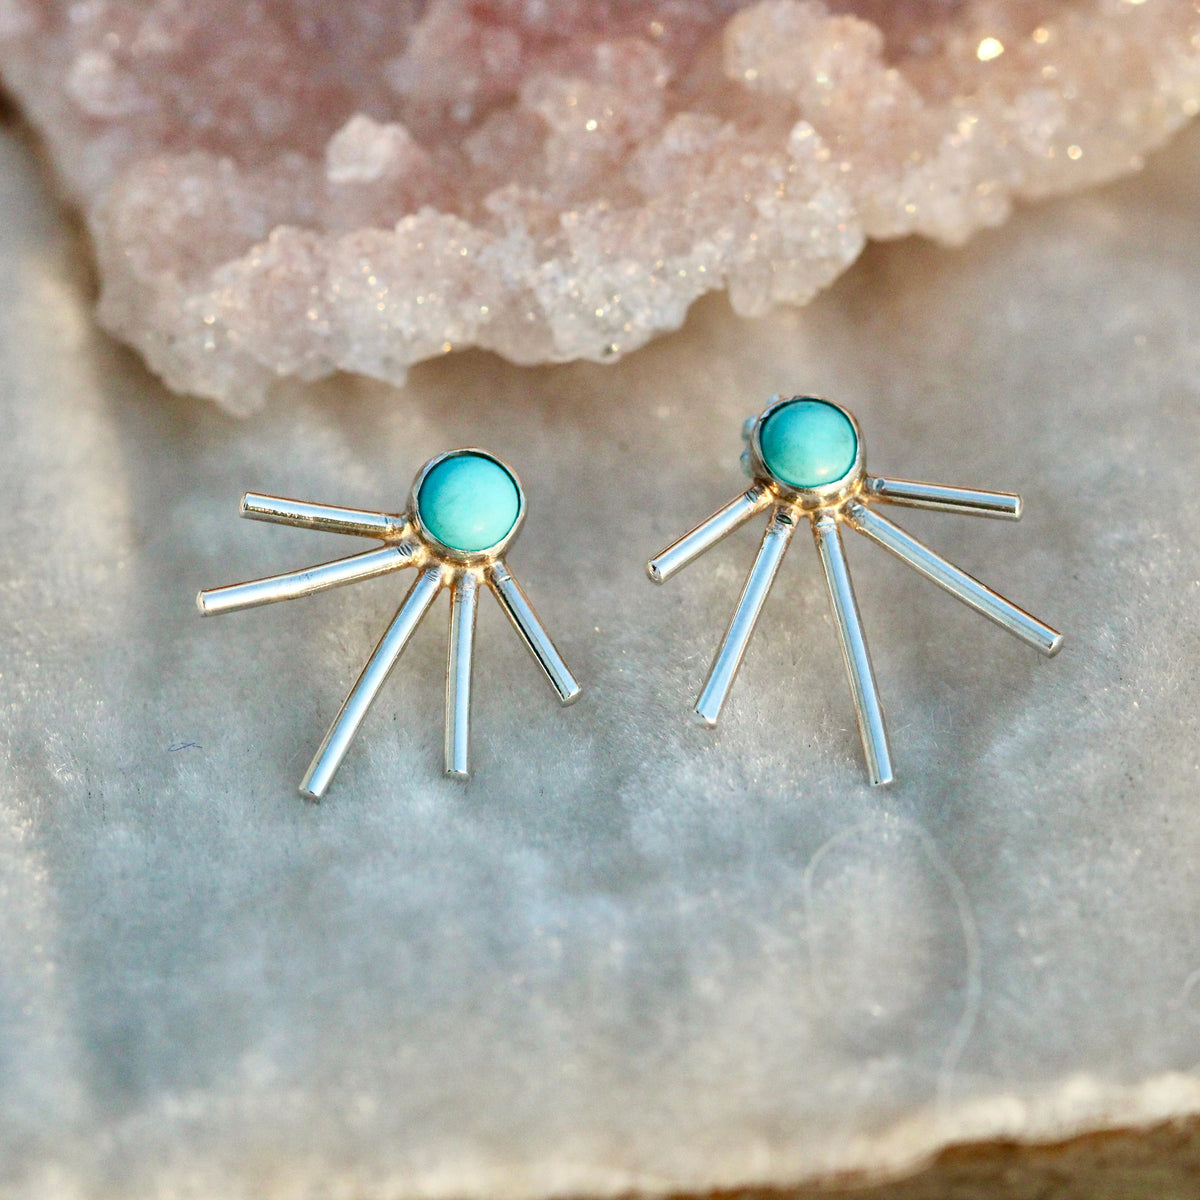 Clearance Sale Starburst earrings Turquoise and sterling silver